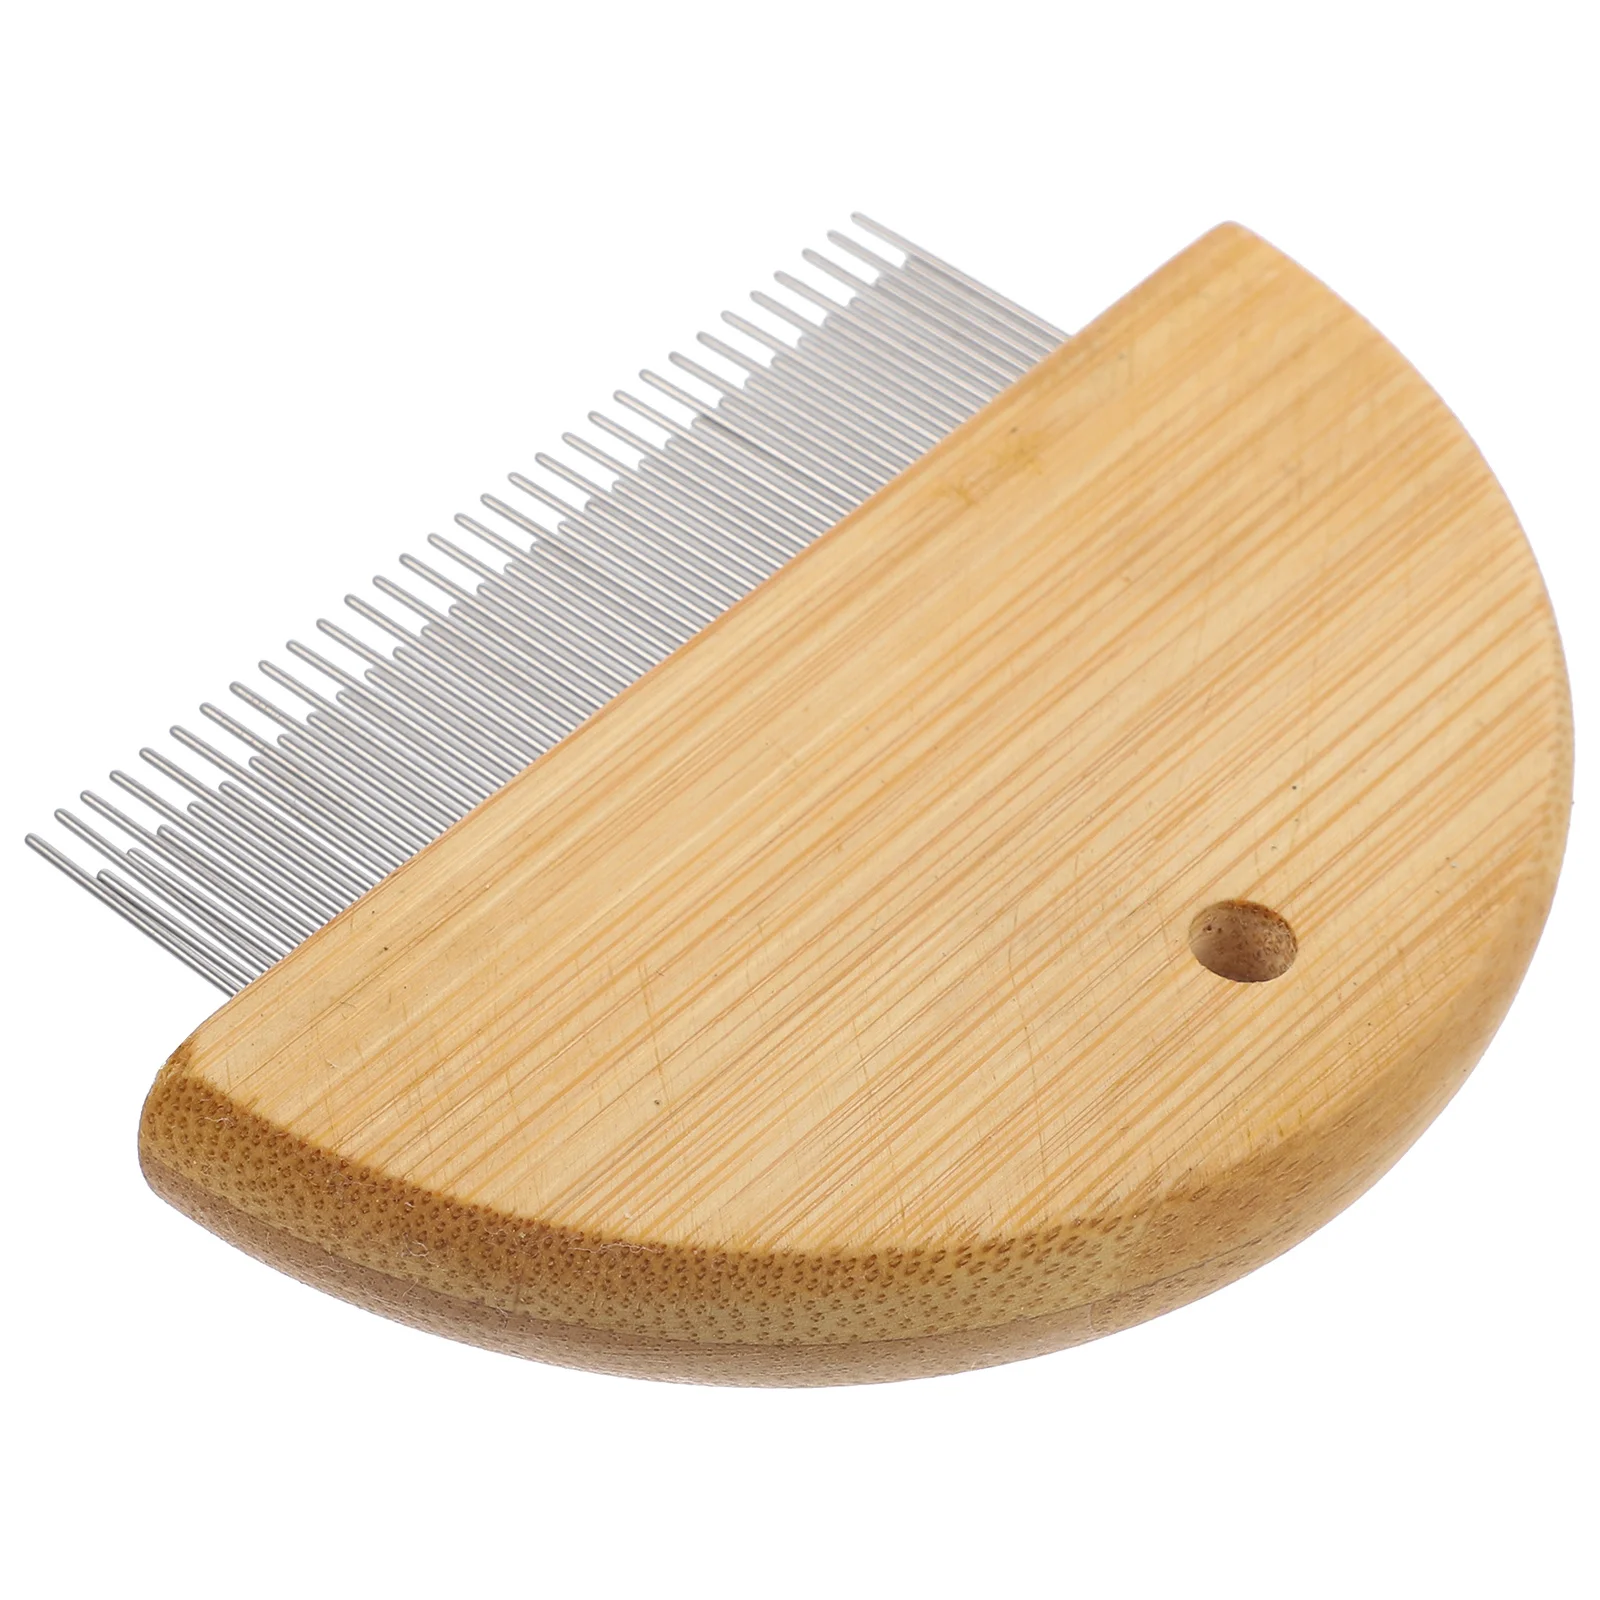 

Wooden Spatula The Tools Deshedding Grooming for Dogs Body Hair Removal Scraper Cattle Bridegroom Cleaning